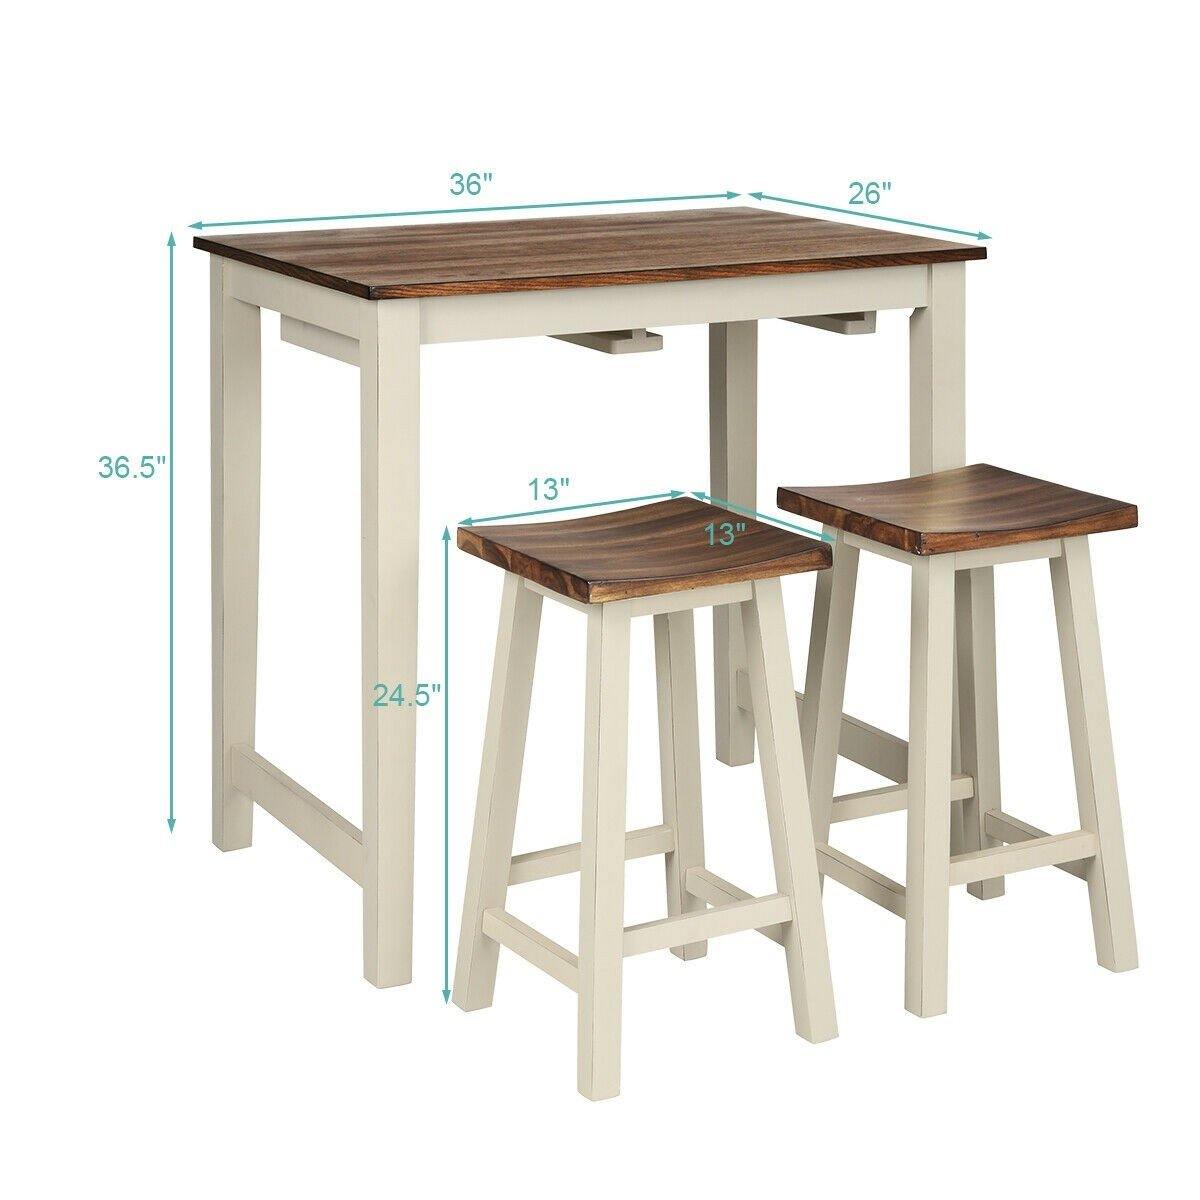 3 Piece Pub Dining Set, Counter Height Pub Table with 2 Saddle Bar Stools, Tavern Collection Table (Brown & Milky White) - Giantexus